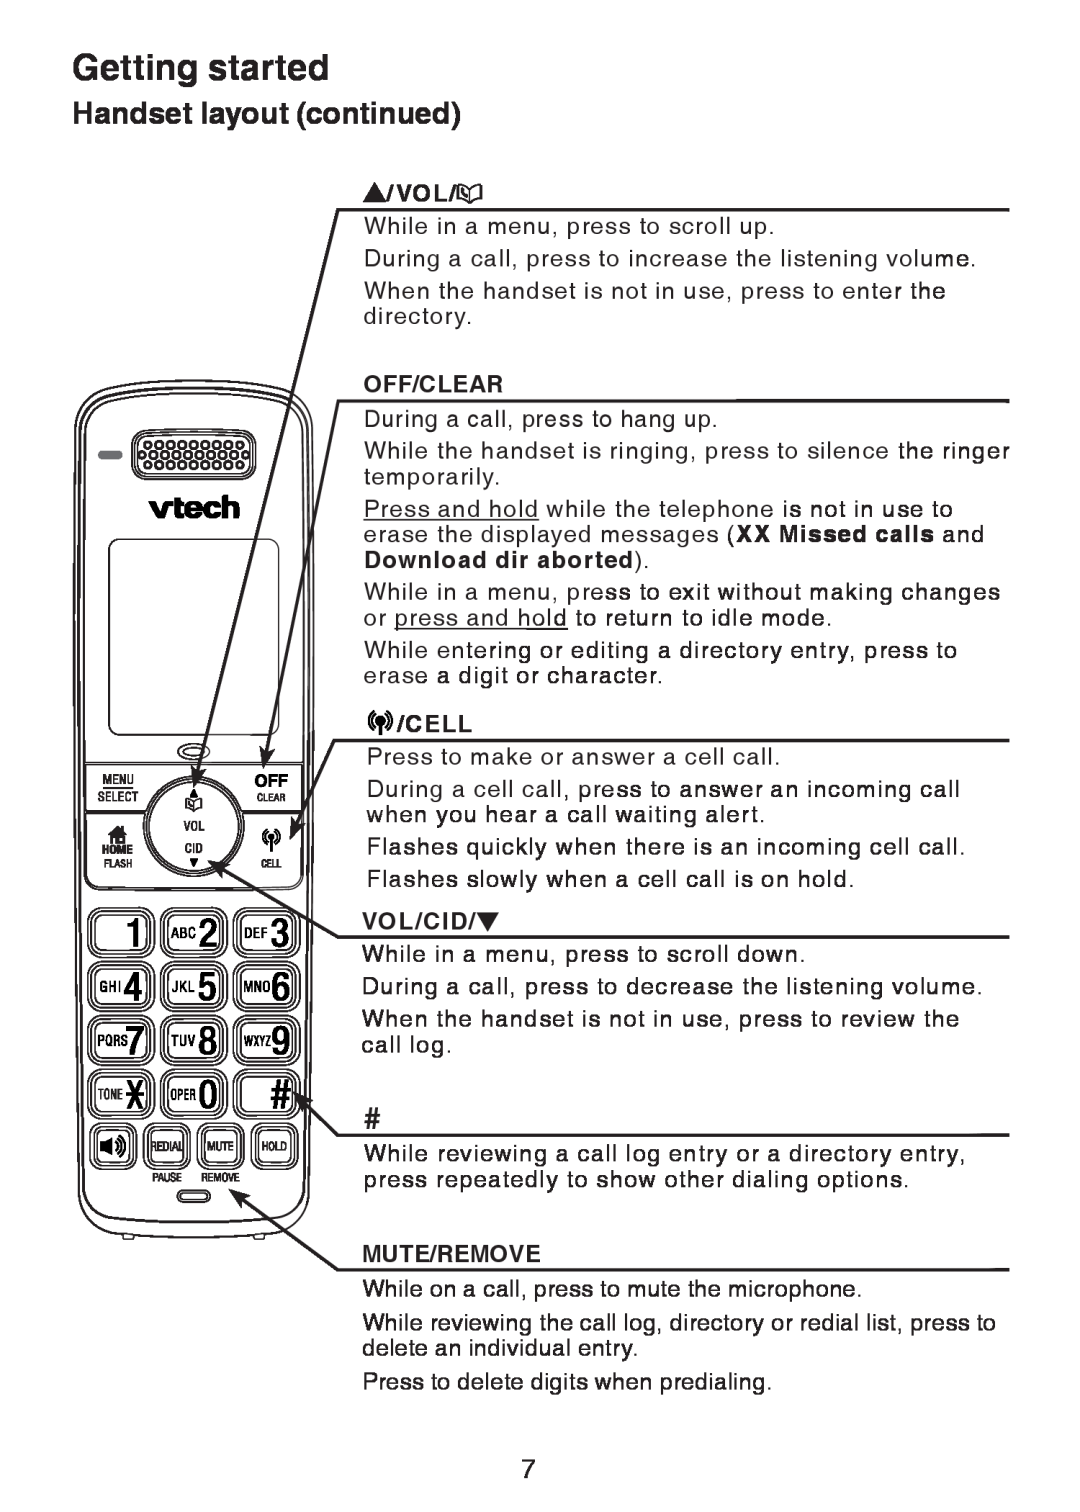 VTech DS6321, DS6322, DS6301 user manual Handset layout continued, Getting started, Off/Clear, Cell, Vol/Cid, Mute/Remove 